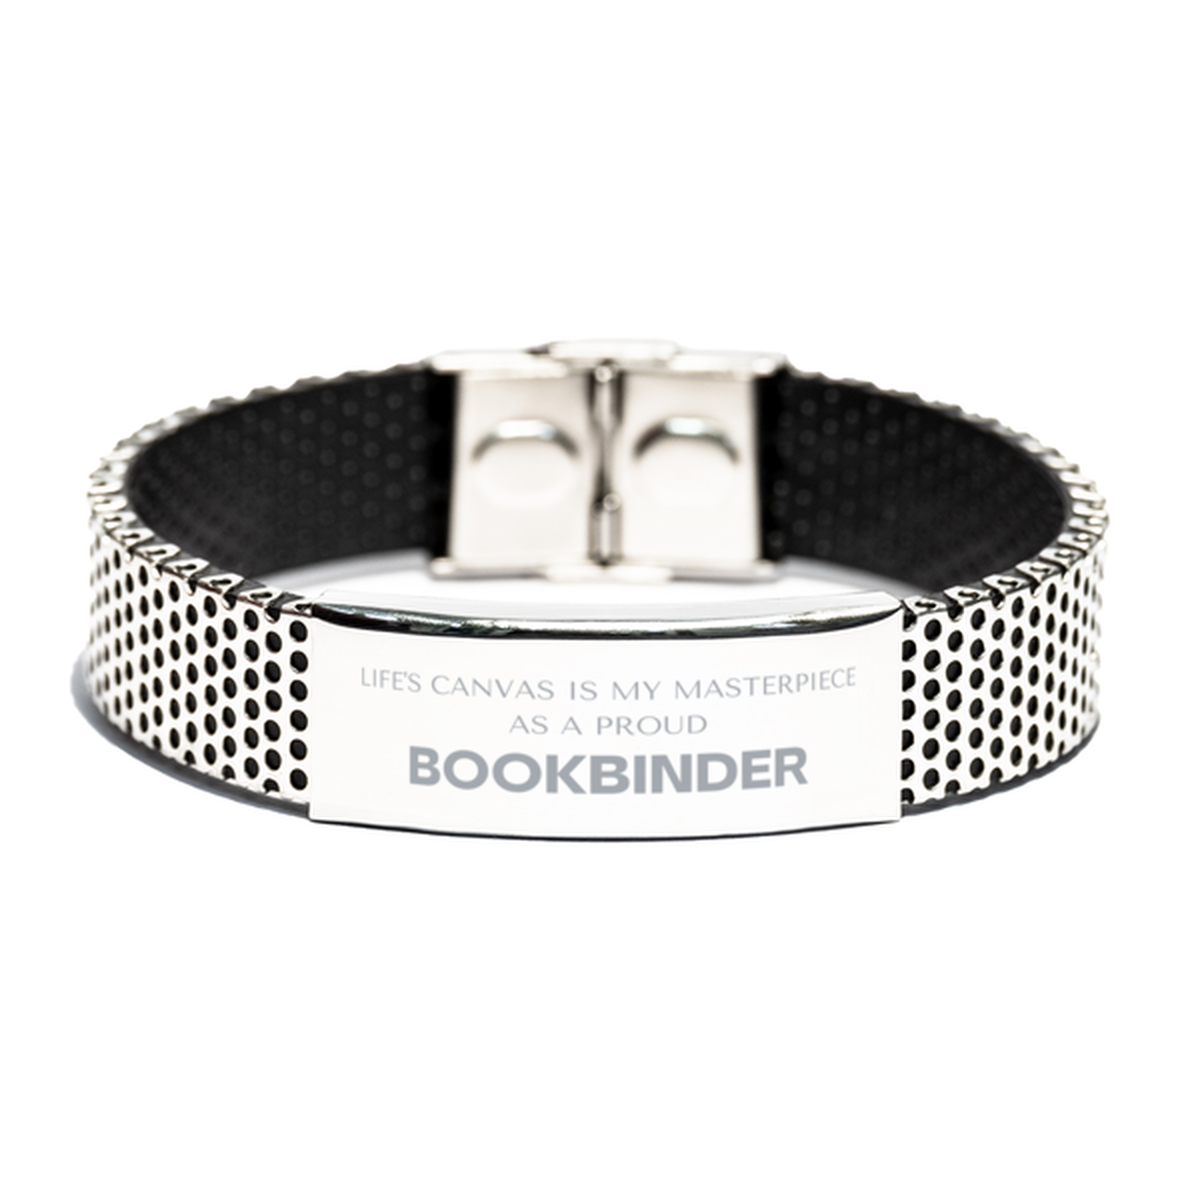 Proud Bookbinder Gifts, Life's canvas is my masterpiece, Epic Birthday Christmas Unique Stainless Steel Bracelet For Bookbinder, Coworkers, Men, Women, Friends